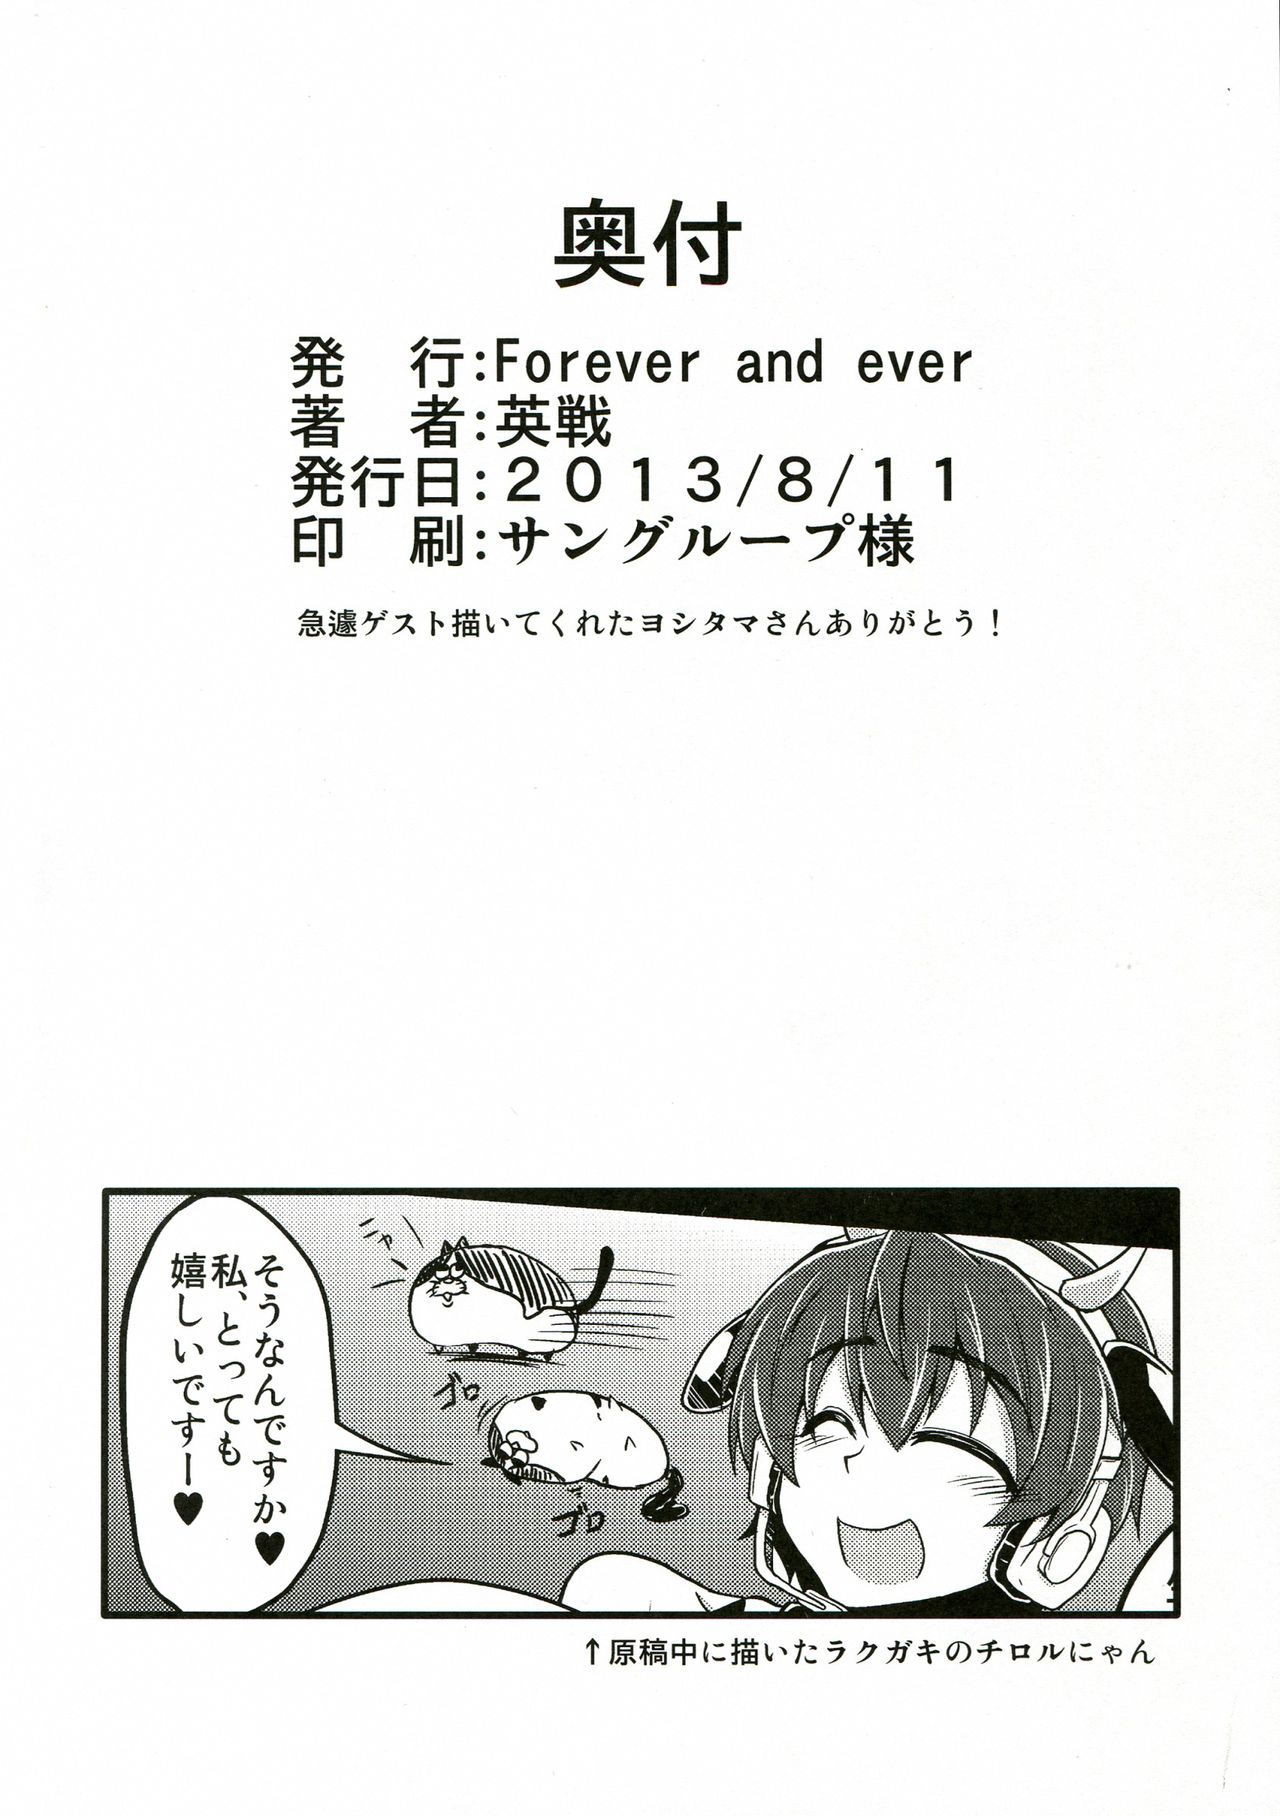 (C84) [Forever and ever.. (Eisen)] Comeback idol training school (THE iDOLM@STER) (C84) [Forever and ever... (英戦)] Comeback idol training school (アイドルマスター)